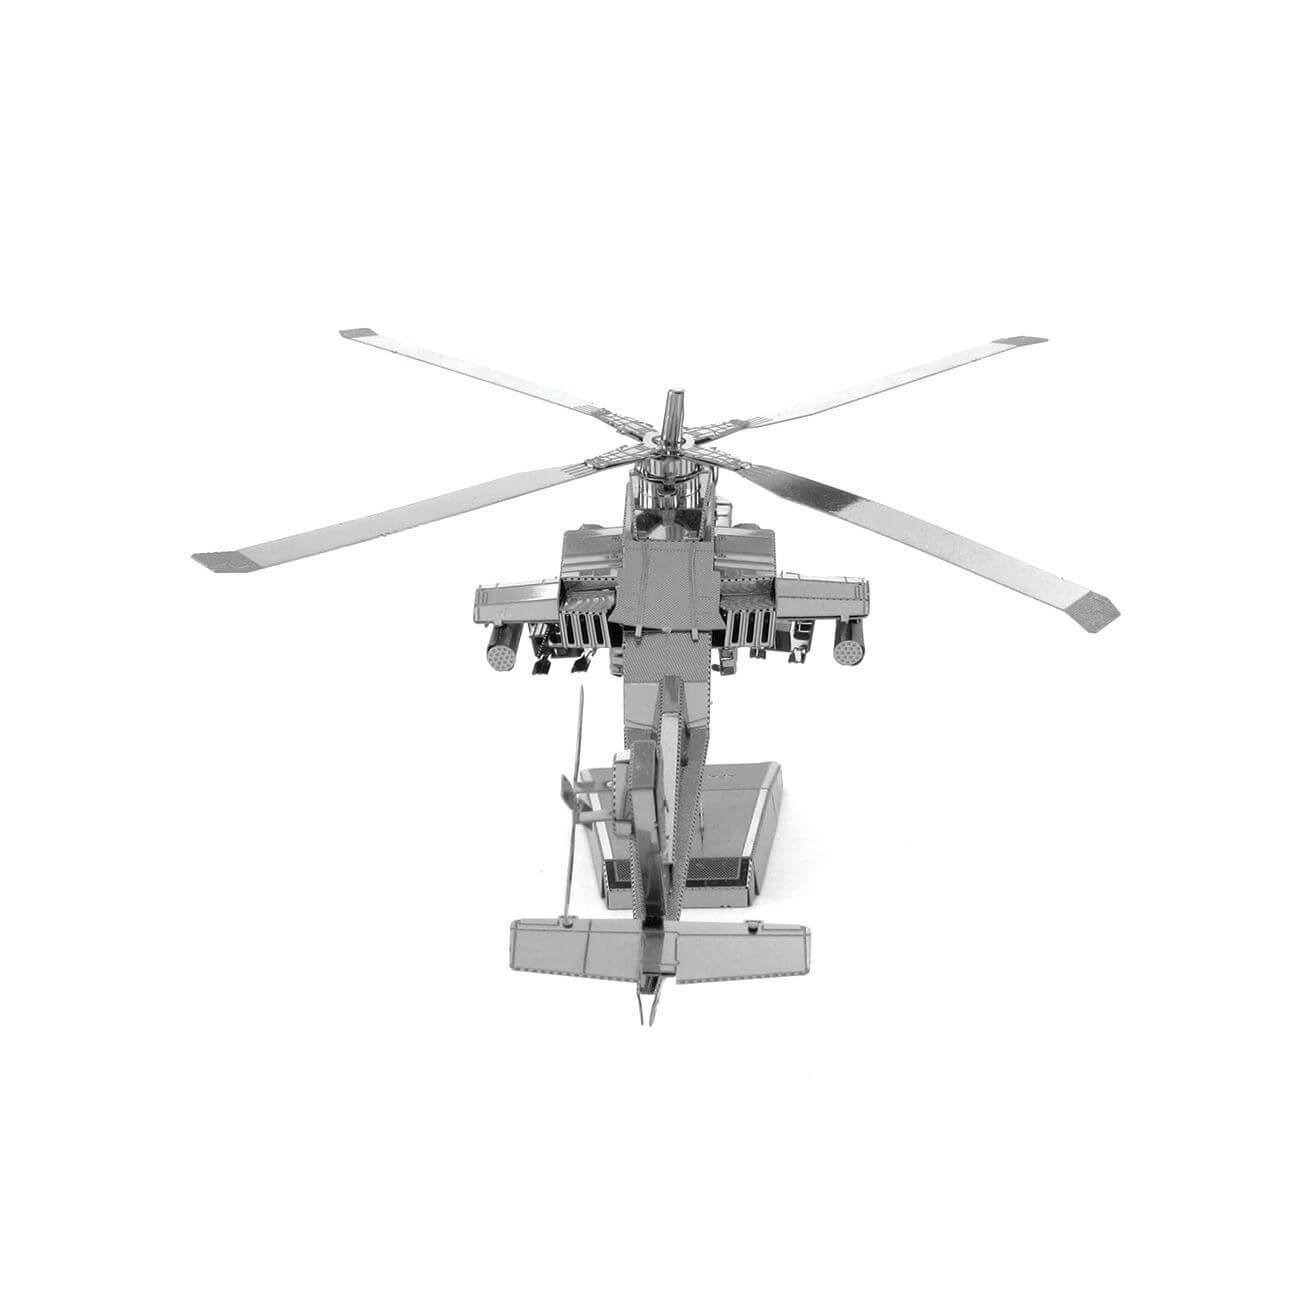 Back view of the metal helicopter.